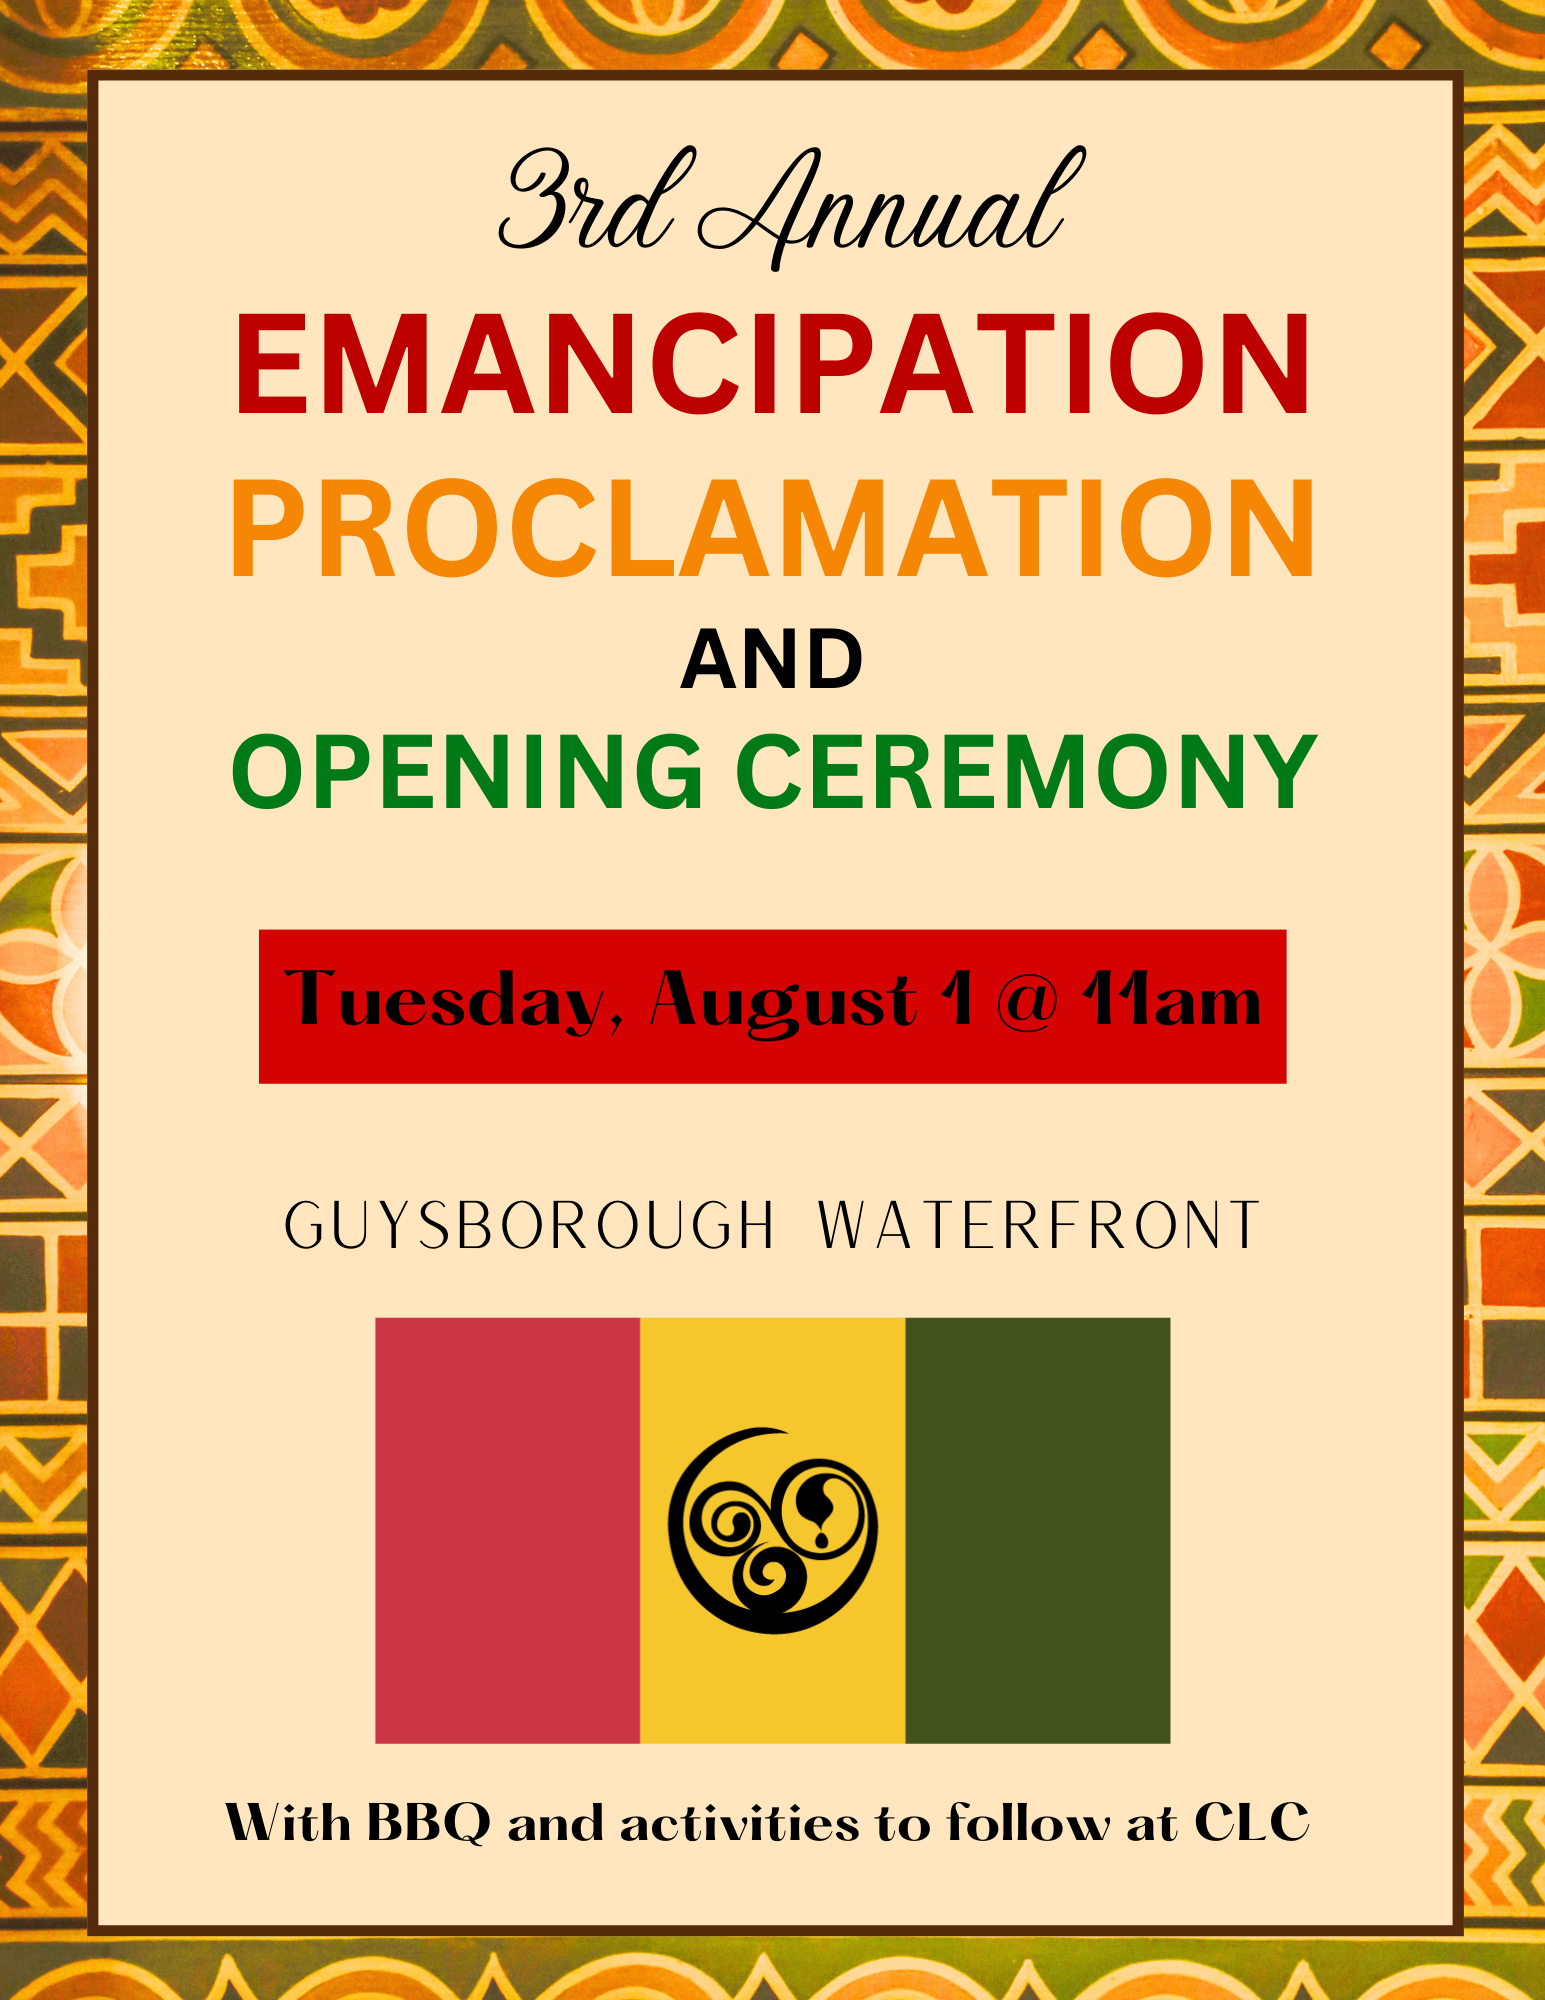 Guysborough’s 3rd Annual Emancipation Proclamation and Opening Ceremony